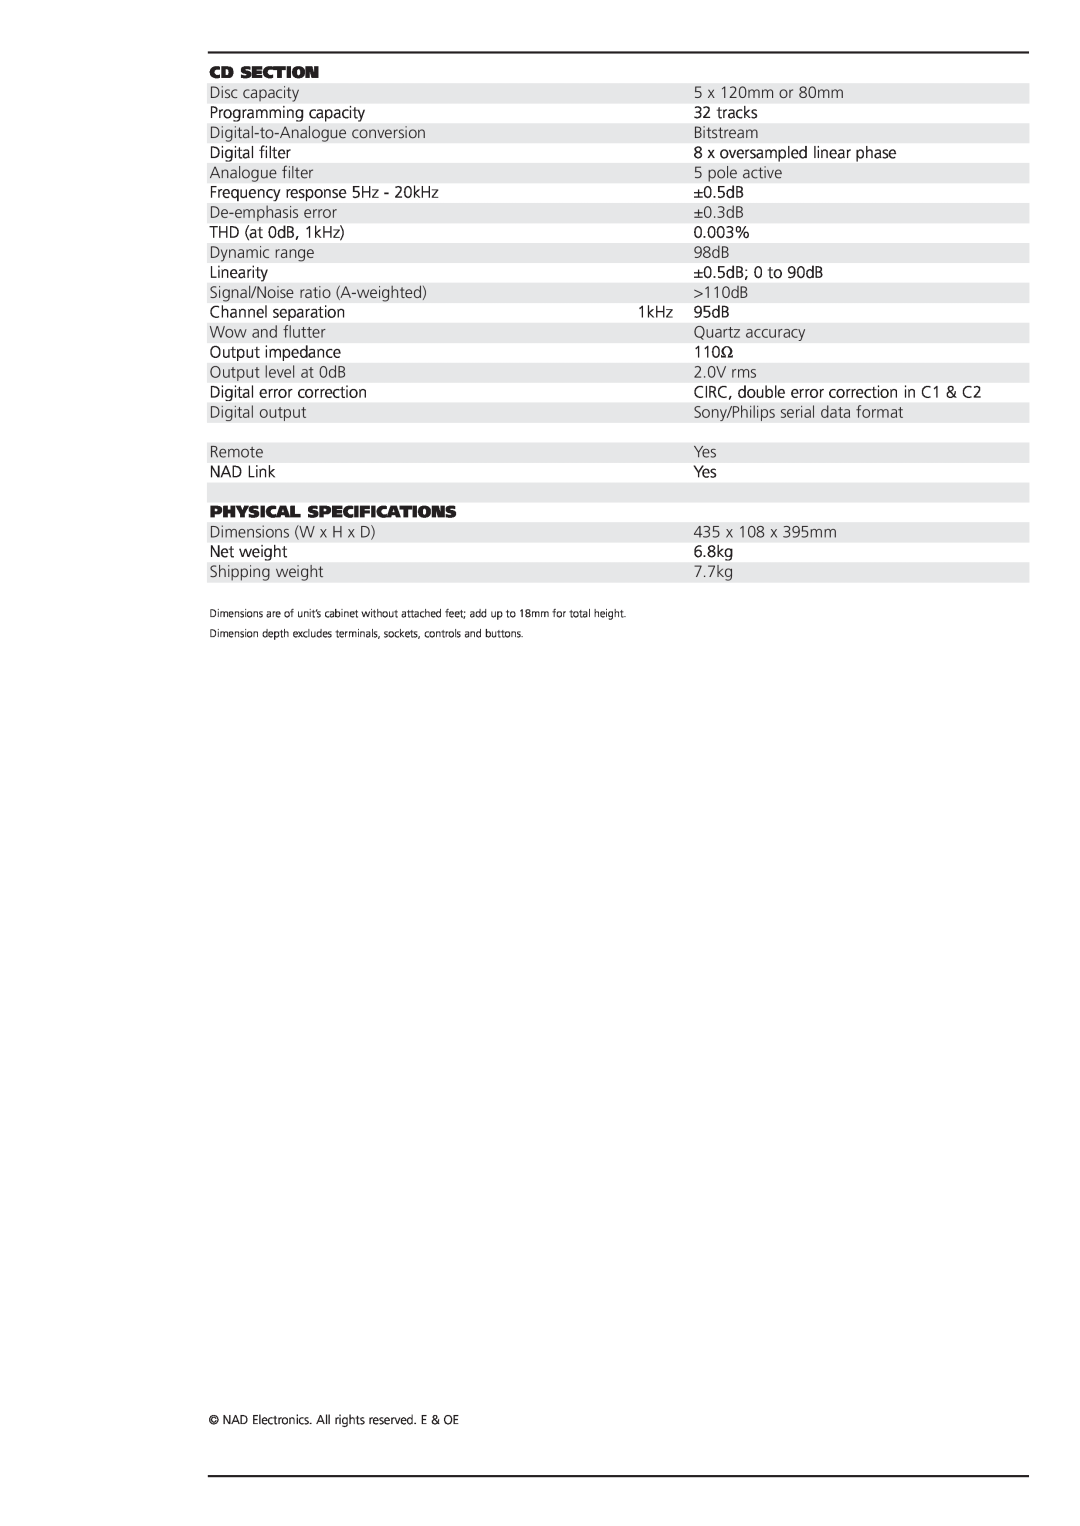 NAD 517 brochure Cd Section, Physical Specifications 